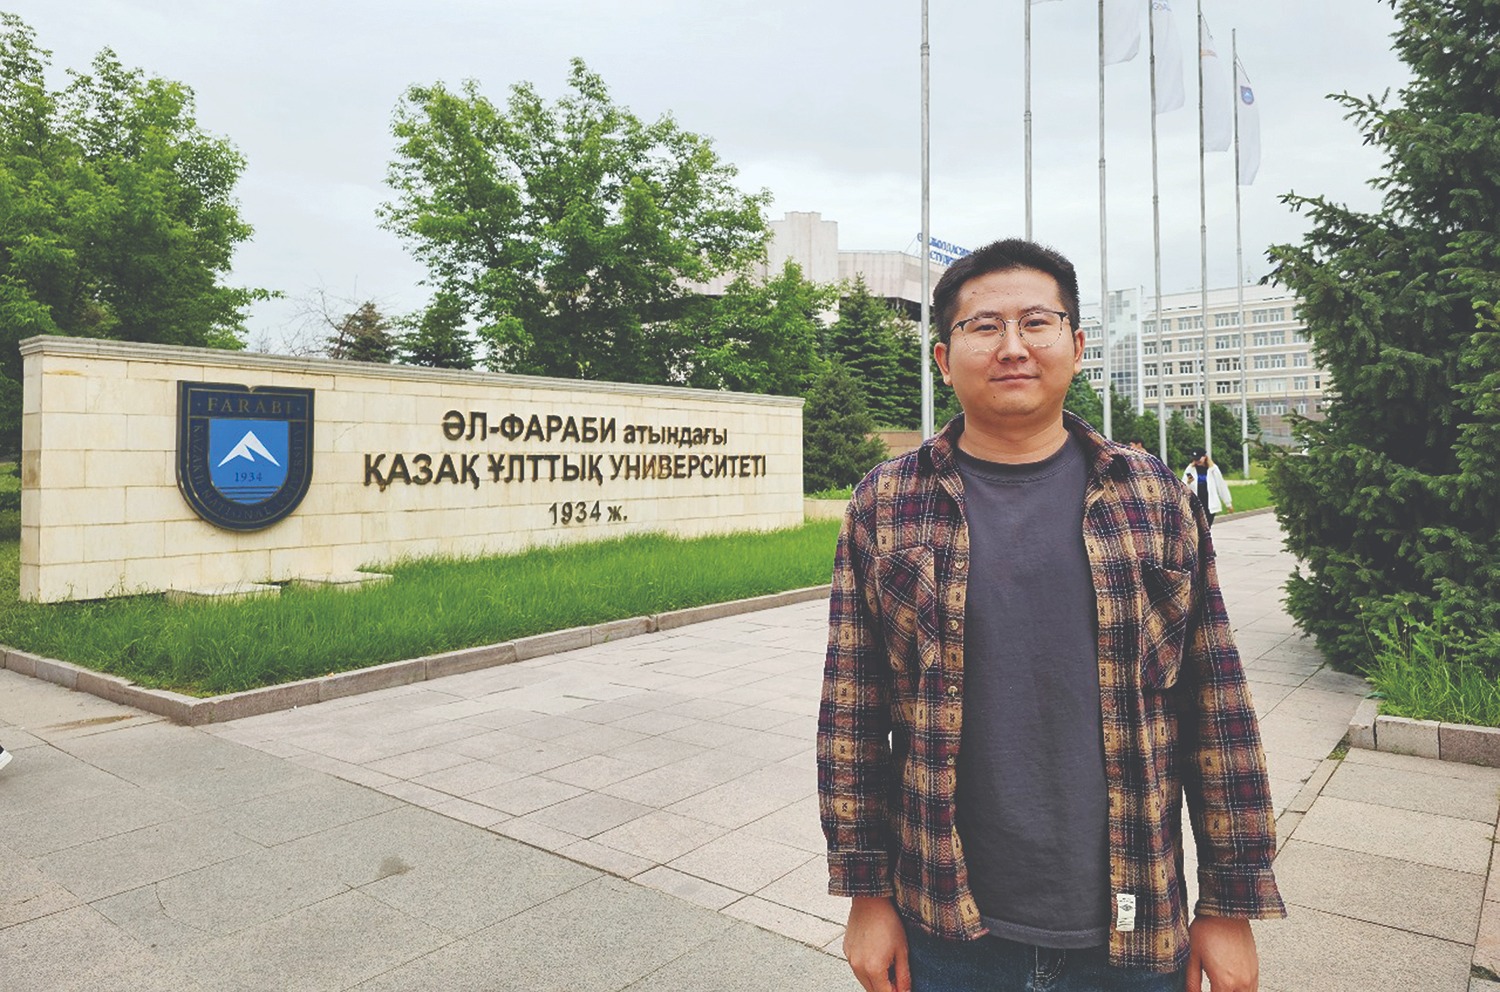 My Journey of Studying in KazNU